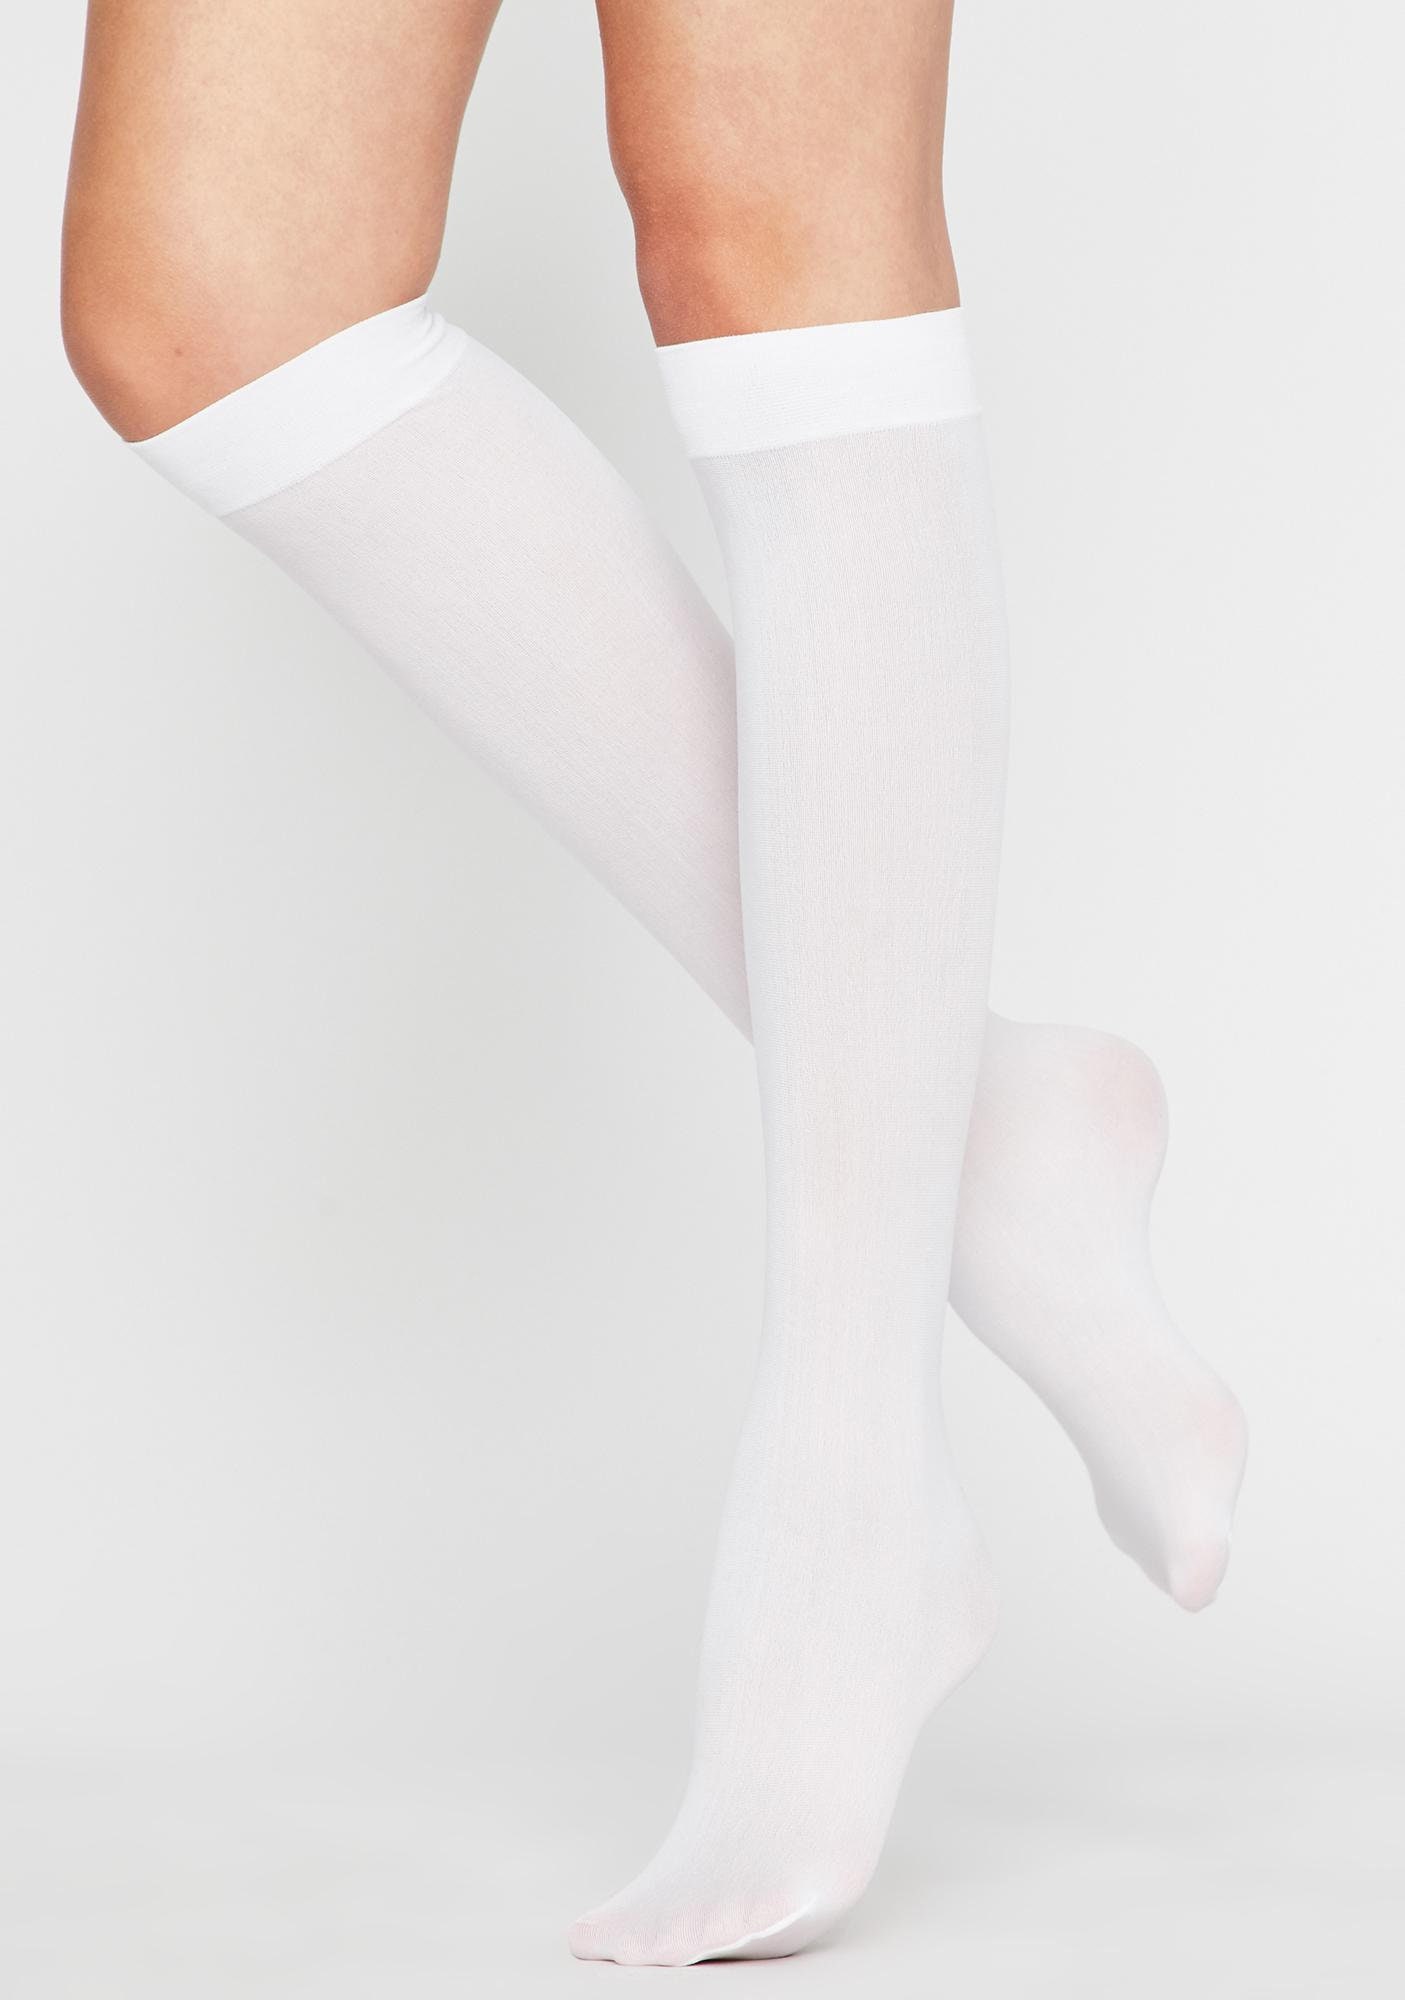 Details about   Sugoi Women's R Small R Knee High Socks White 